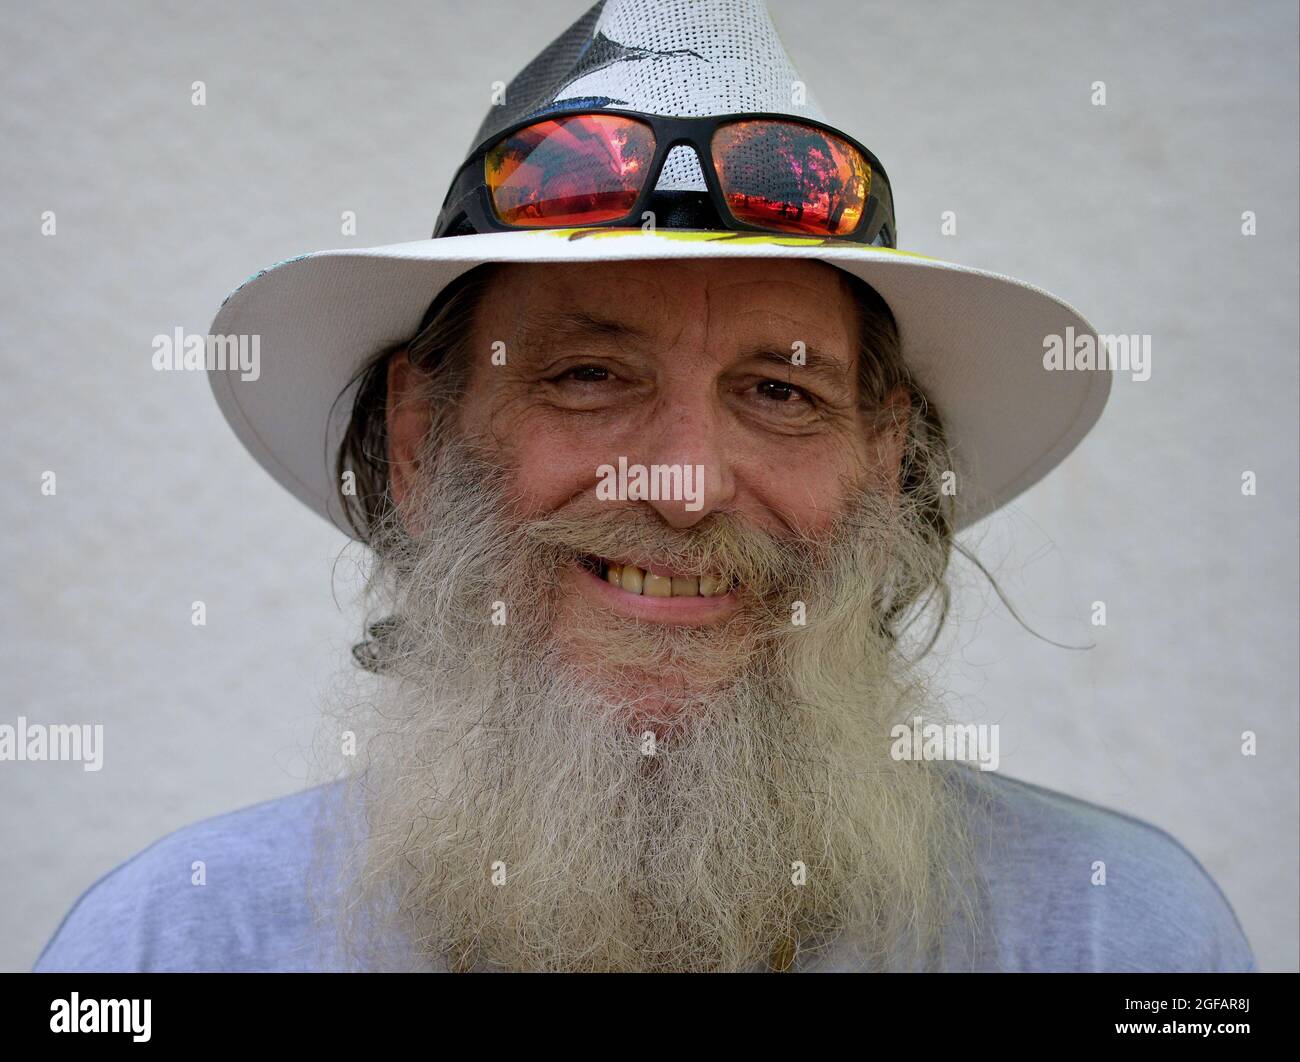 Bearded optimistic elderly Caucasian man smiles and wears a painted Panama hat with colorful sunglasses on the brim of his hat, white background. Stock Photo